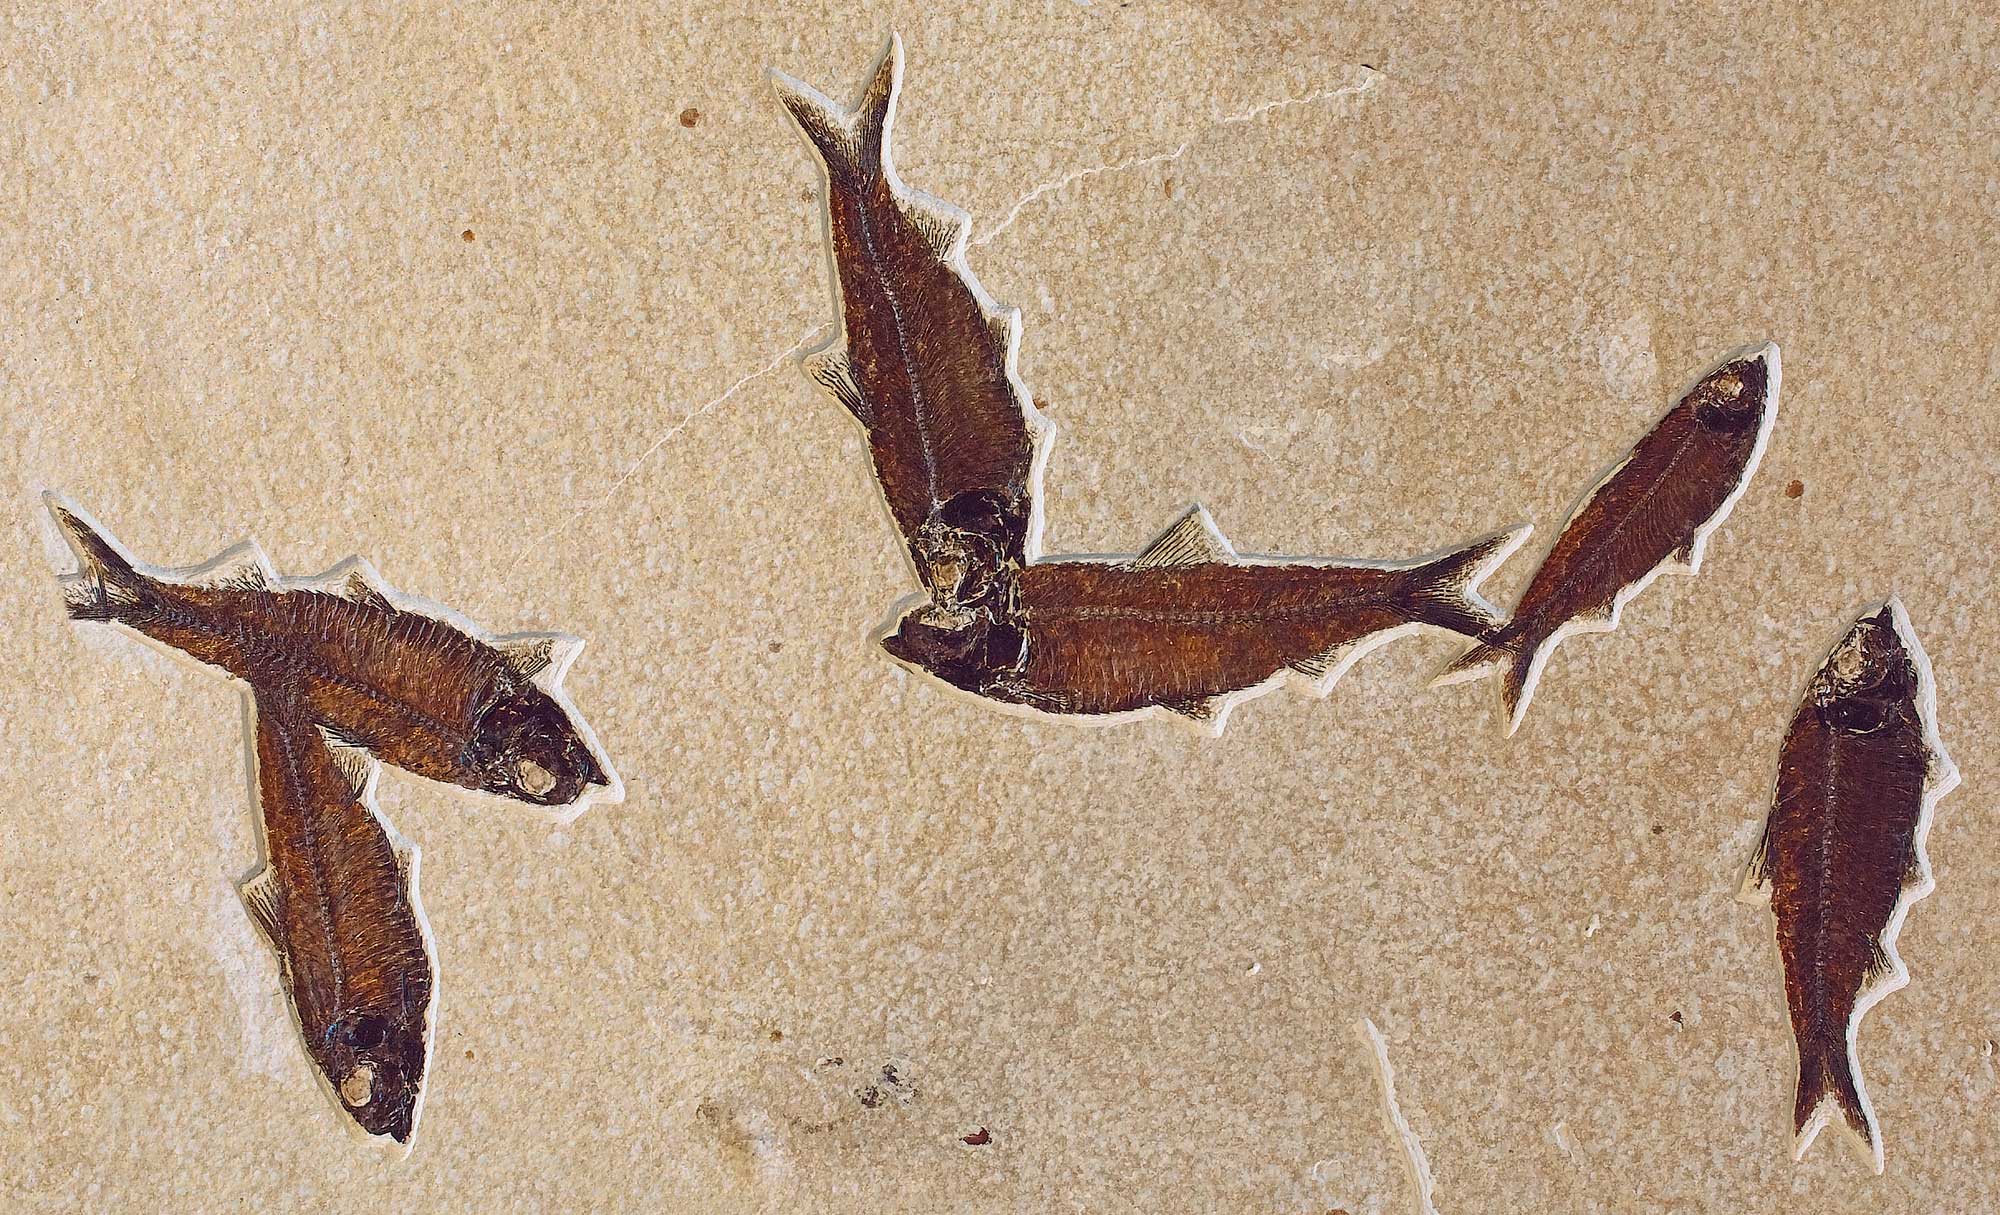 Photograph of a slab of six fossil fish from Fossil Butte National Monument, Wyoming. The fish are each nearly complete and brown in color. The are preserved on a beige slab of rock and oriented with their heads in different directions.